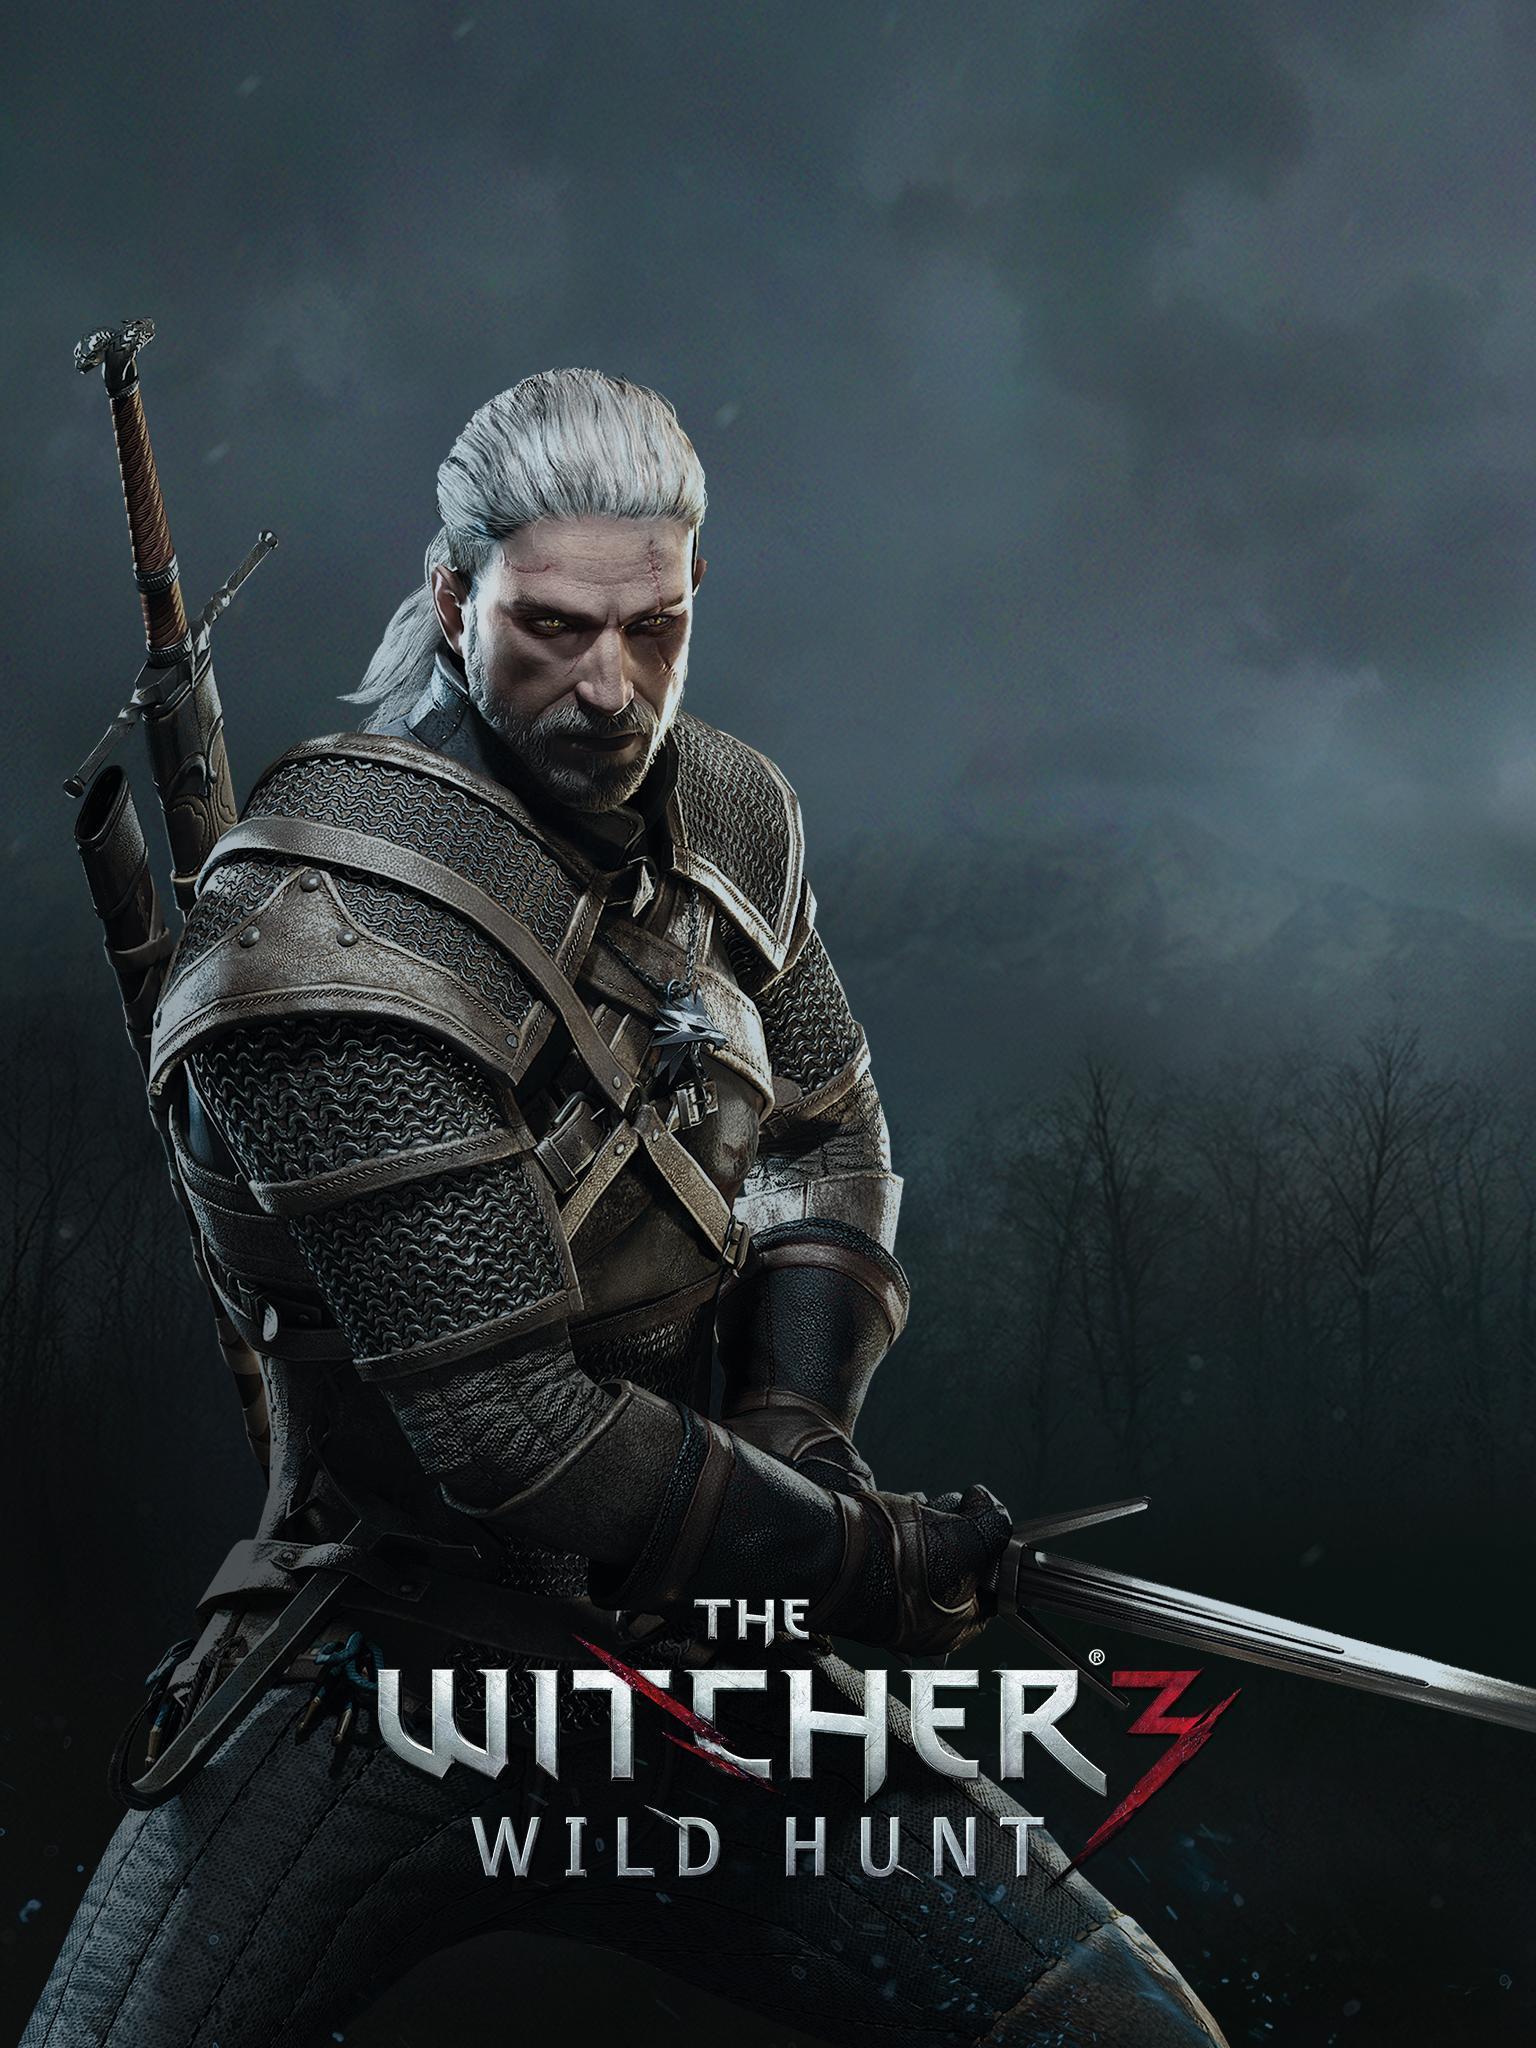 1536 x 2048 · jpeg - The Witcher 3 Wild Hunt Poster Wallpapers - Wallpaper Cave